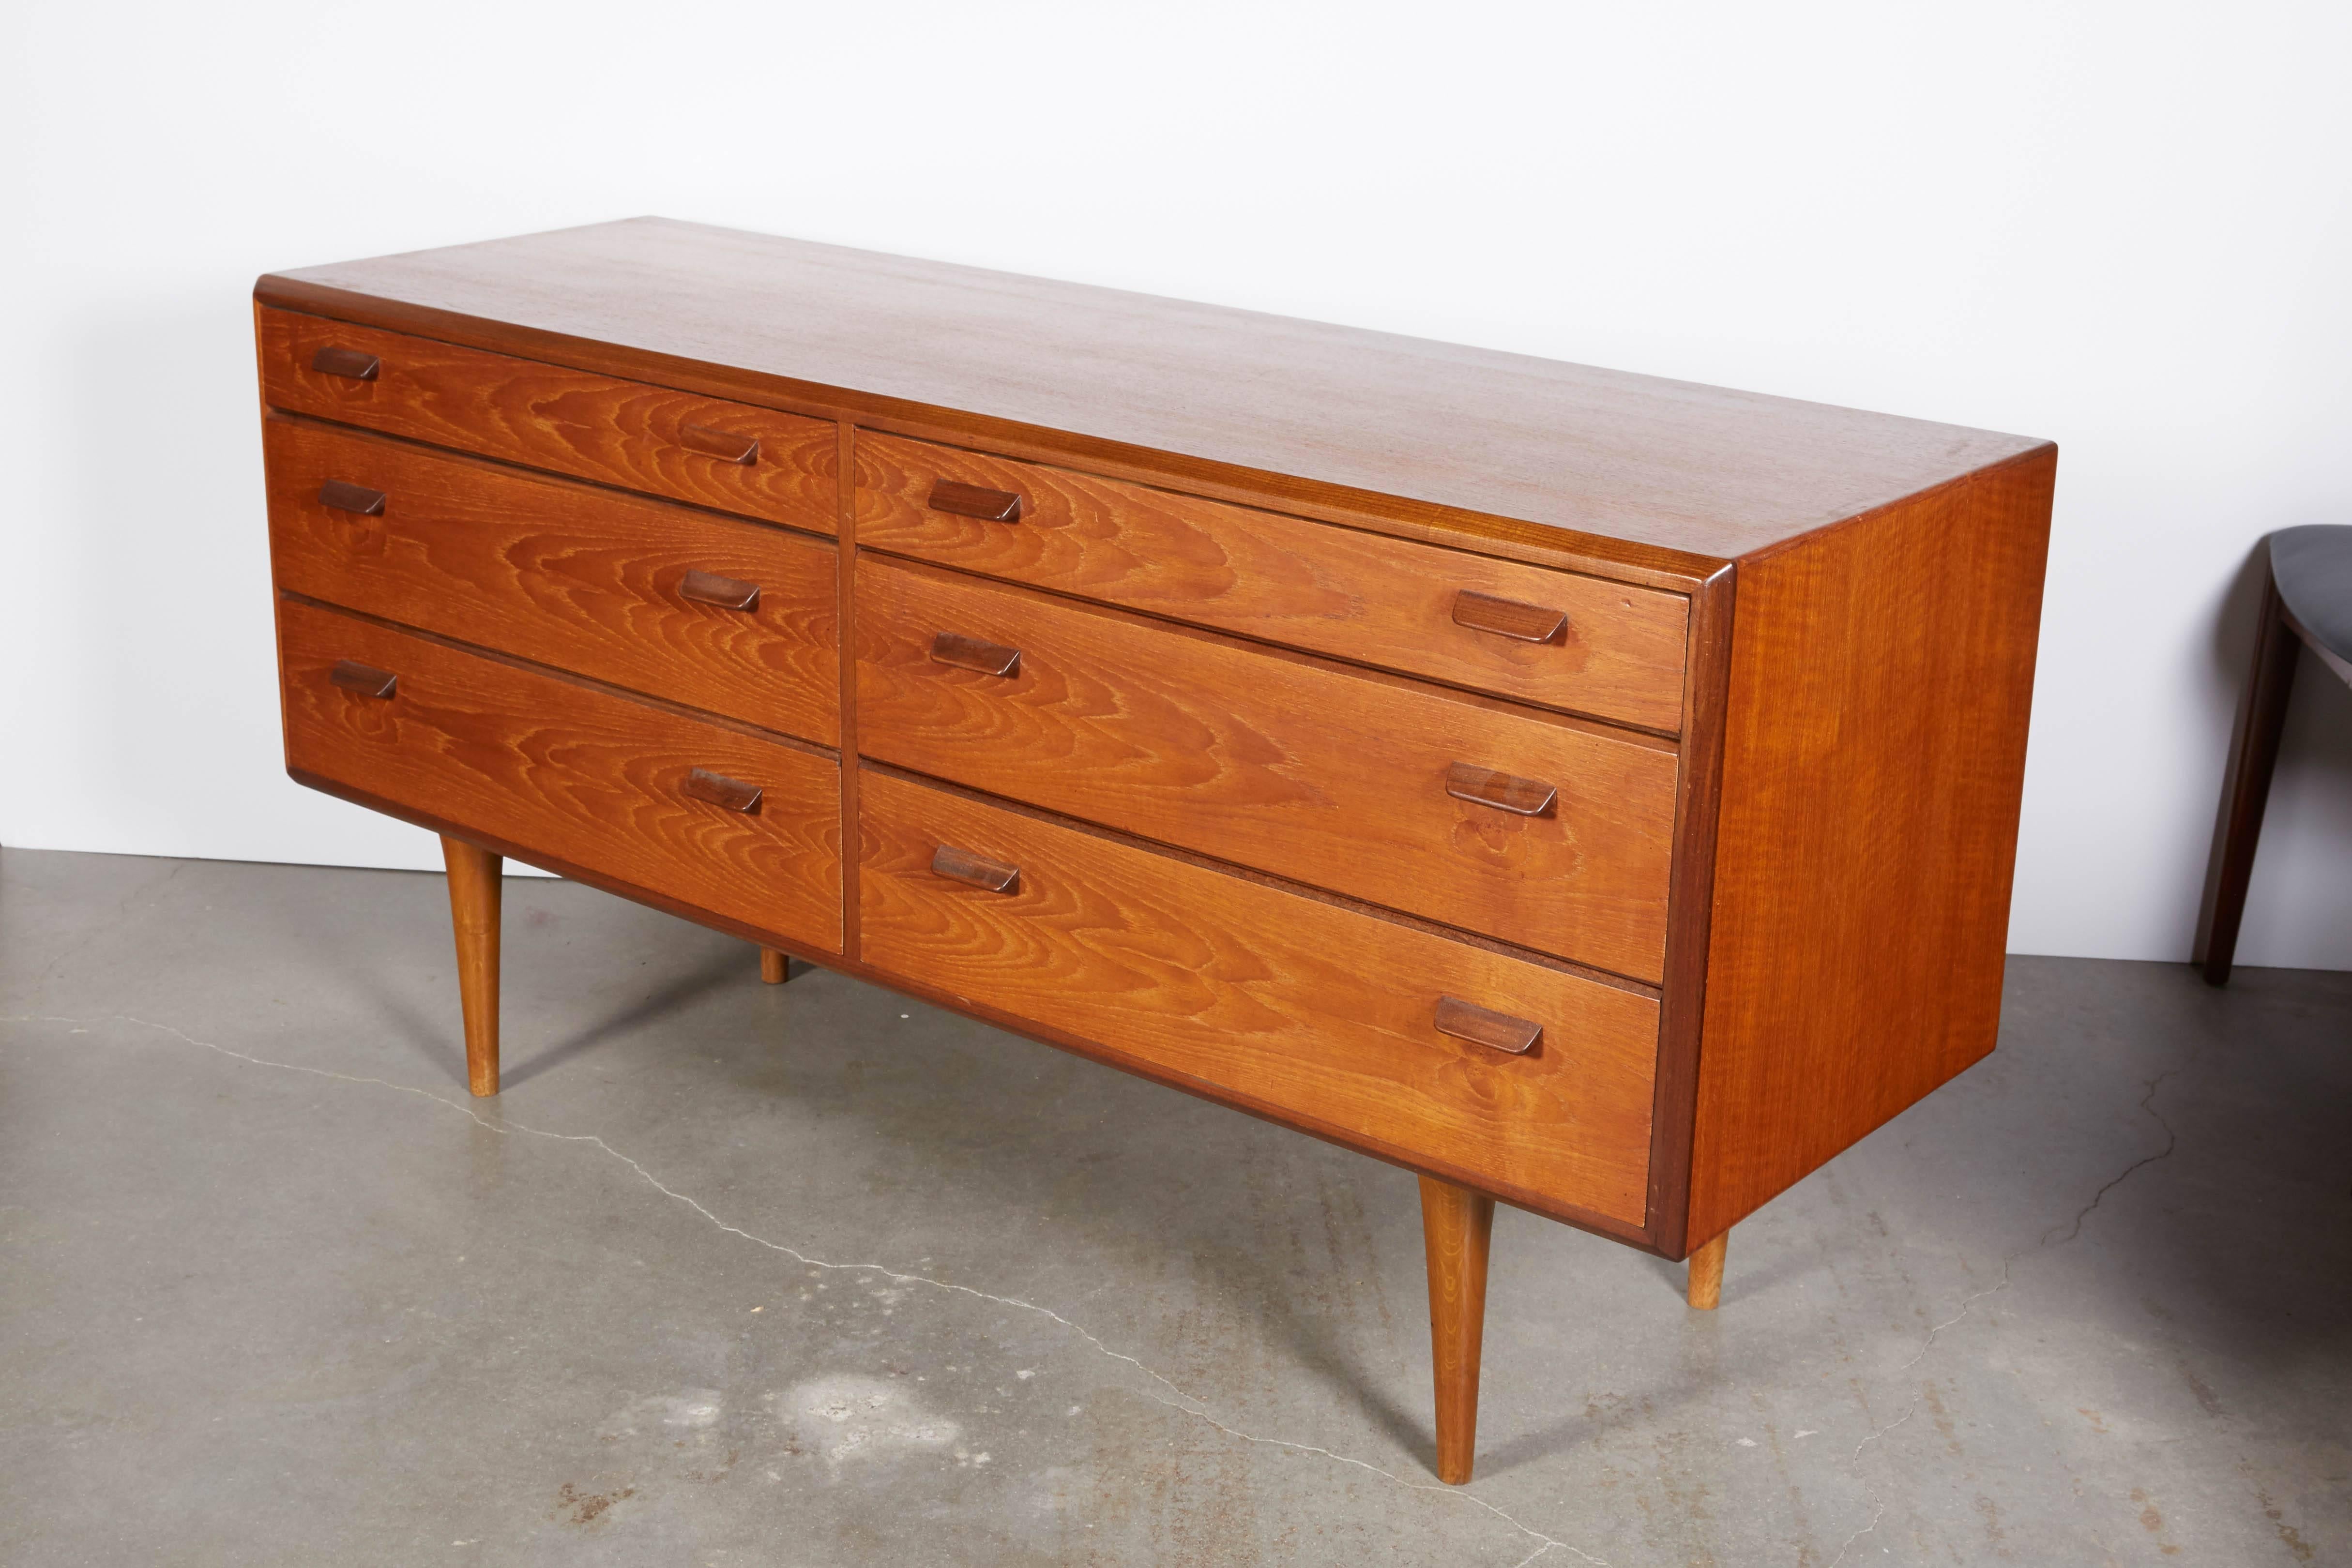 Vintage 1950s Poul Volther Teak Dresser

This Danish low dresser is in excellent condition. The to drawers are lined with felt for watches, and jewelry. Can also be used in a dining room, or for media storage. Ready for pick up, delivery, or